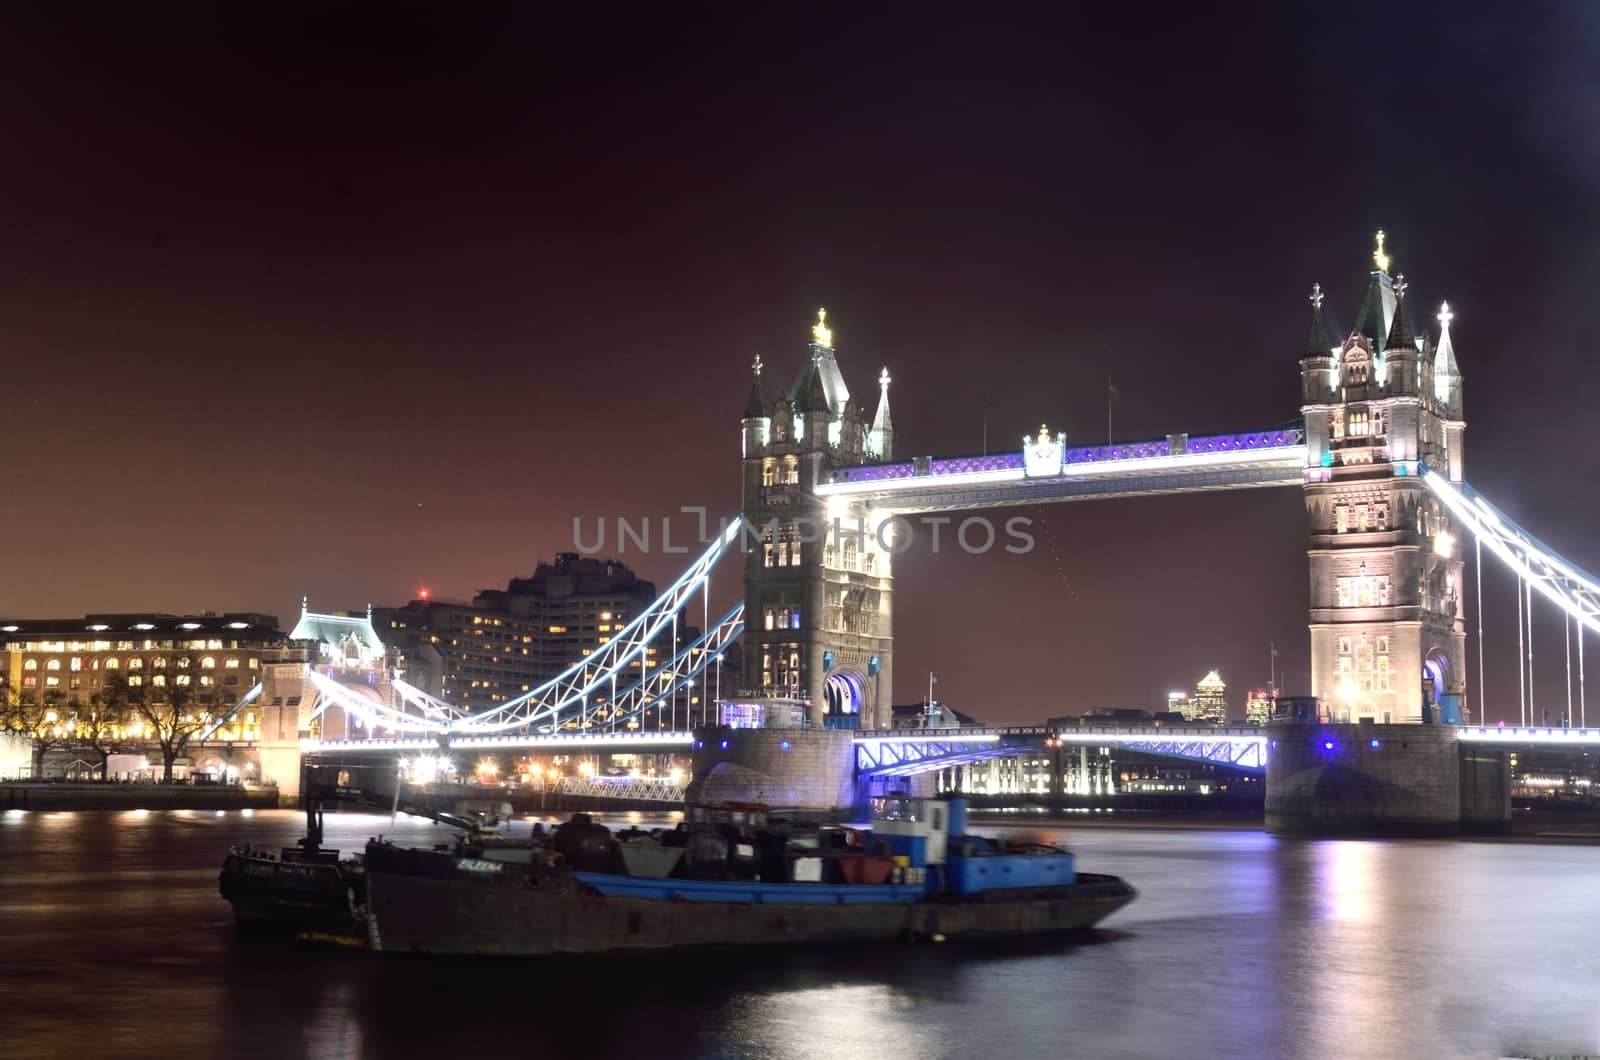 Tower Bridge by night with Boat by pauws99